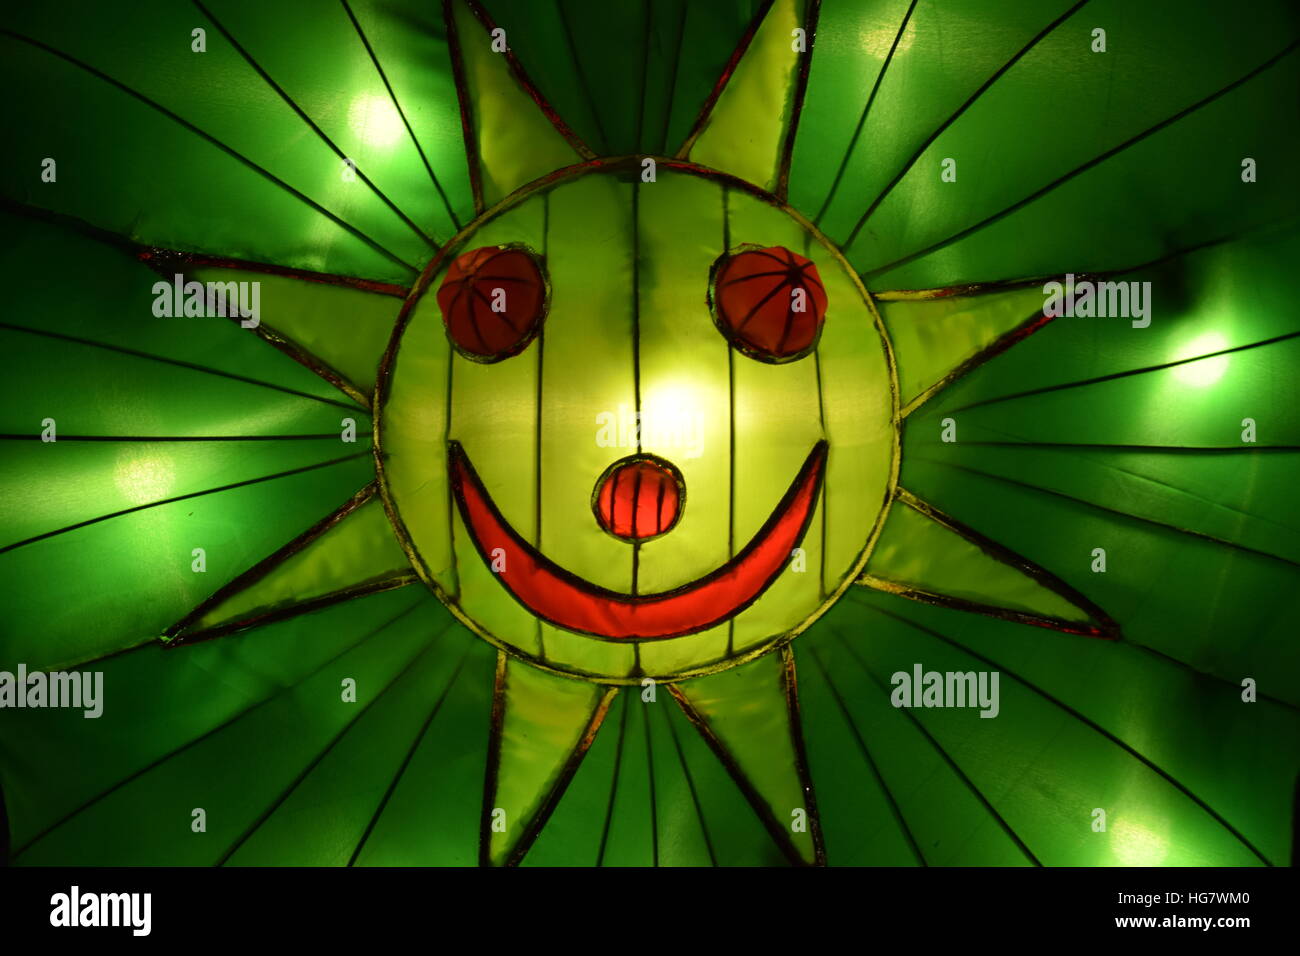 Chinese Smiley Sonne. Stockfoto